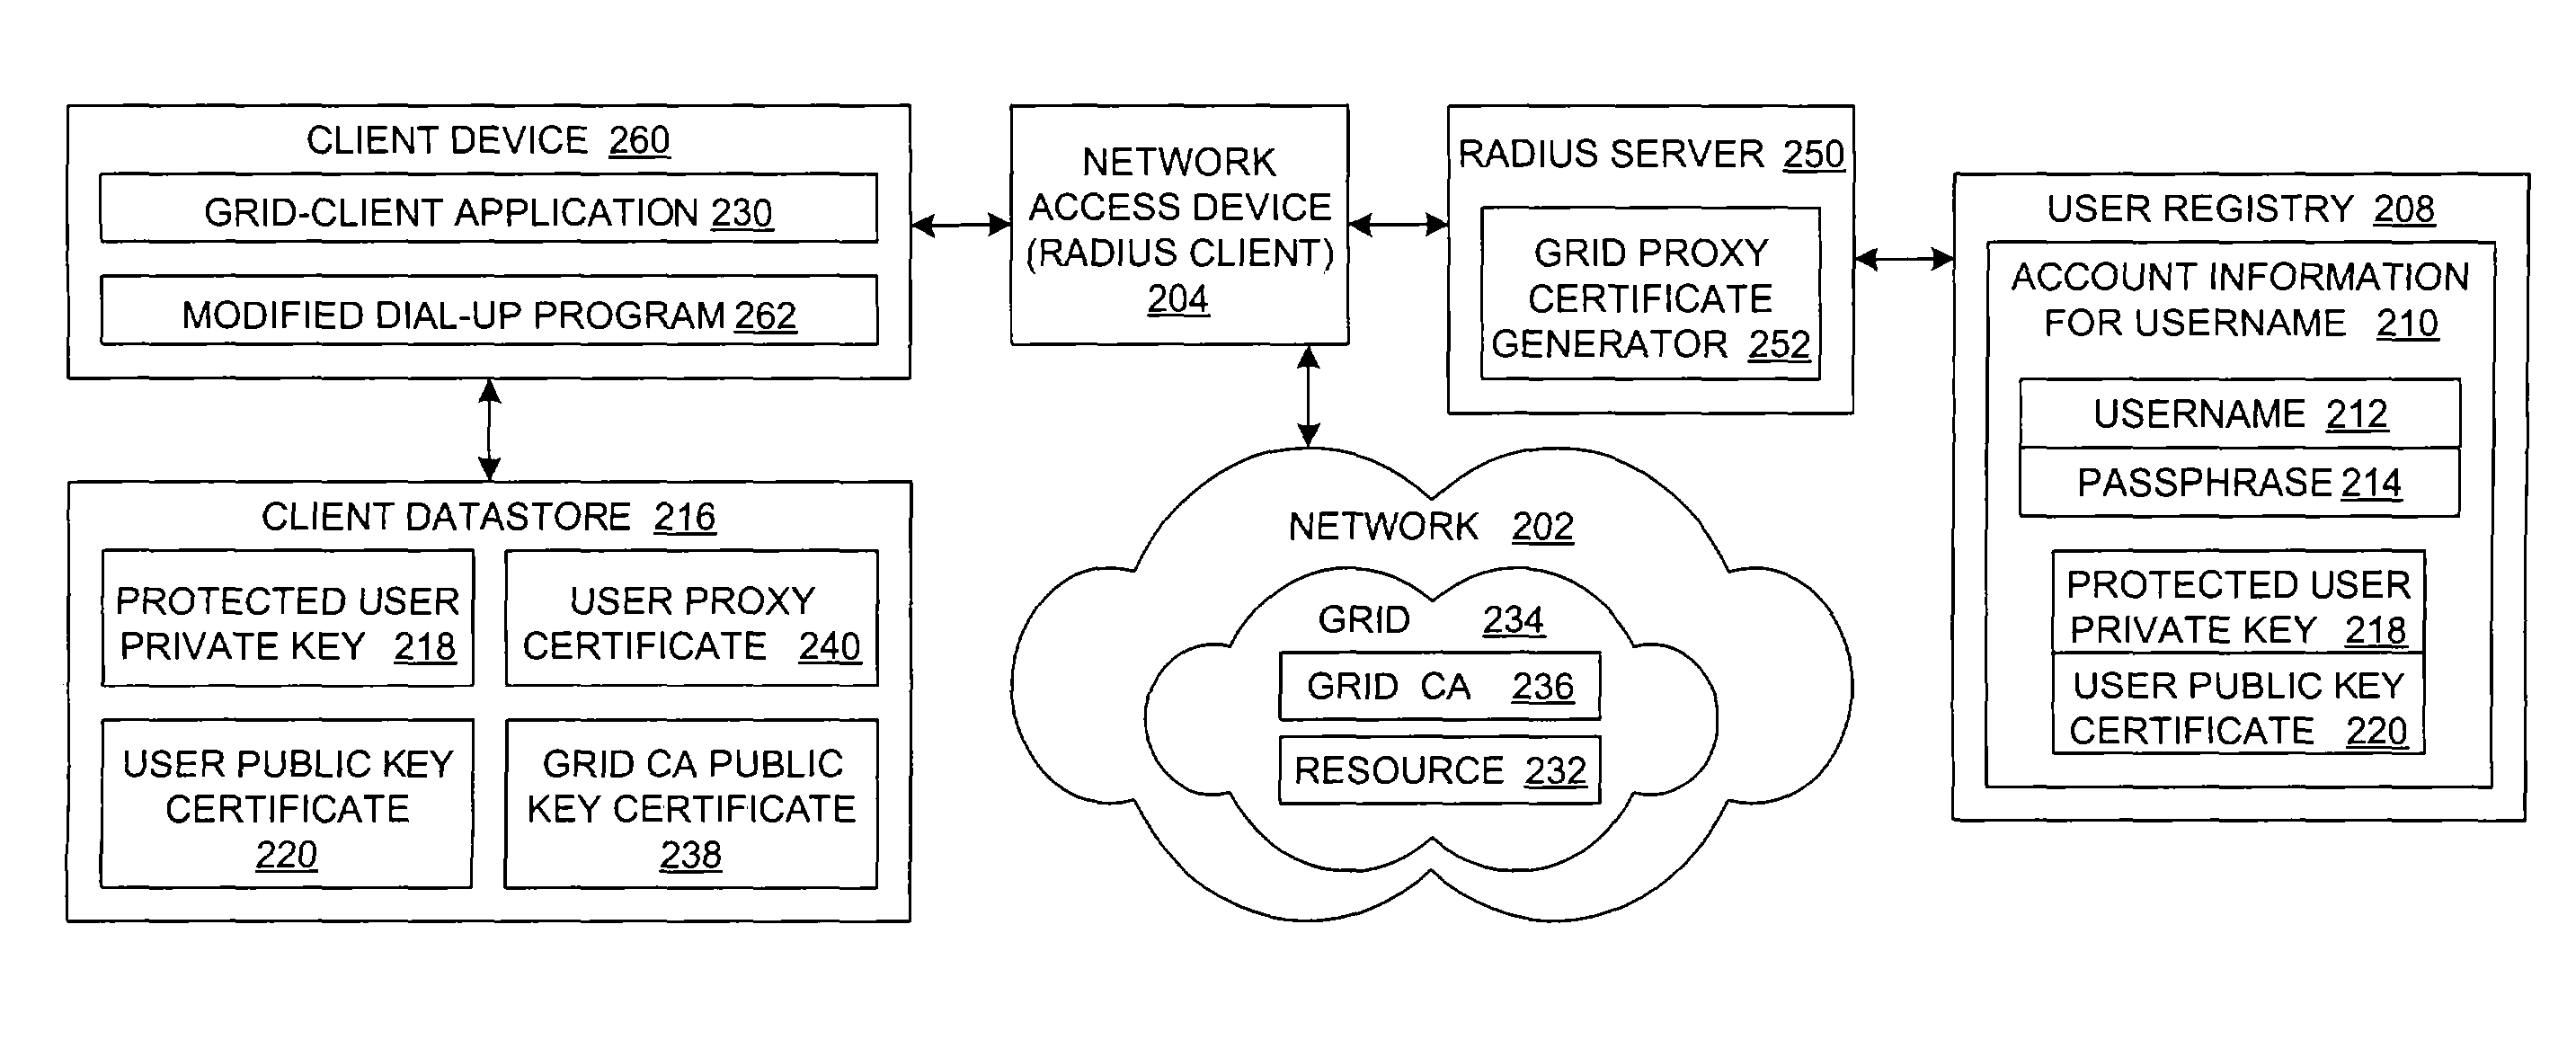 Method and system for a single-sign-on operation providing grid access and network access